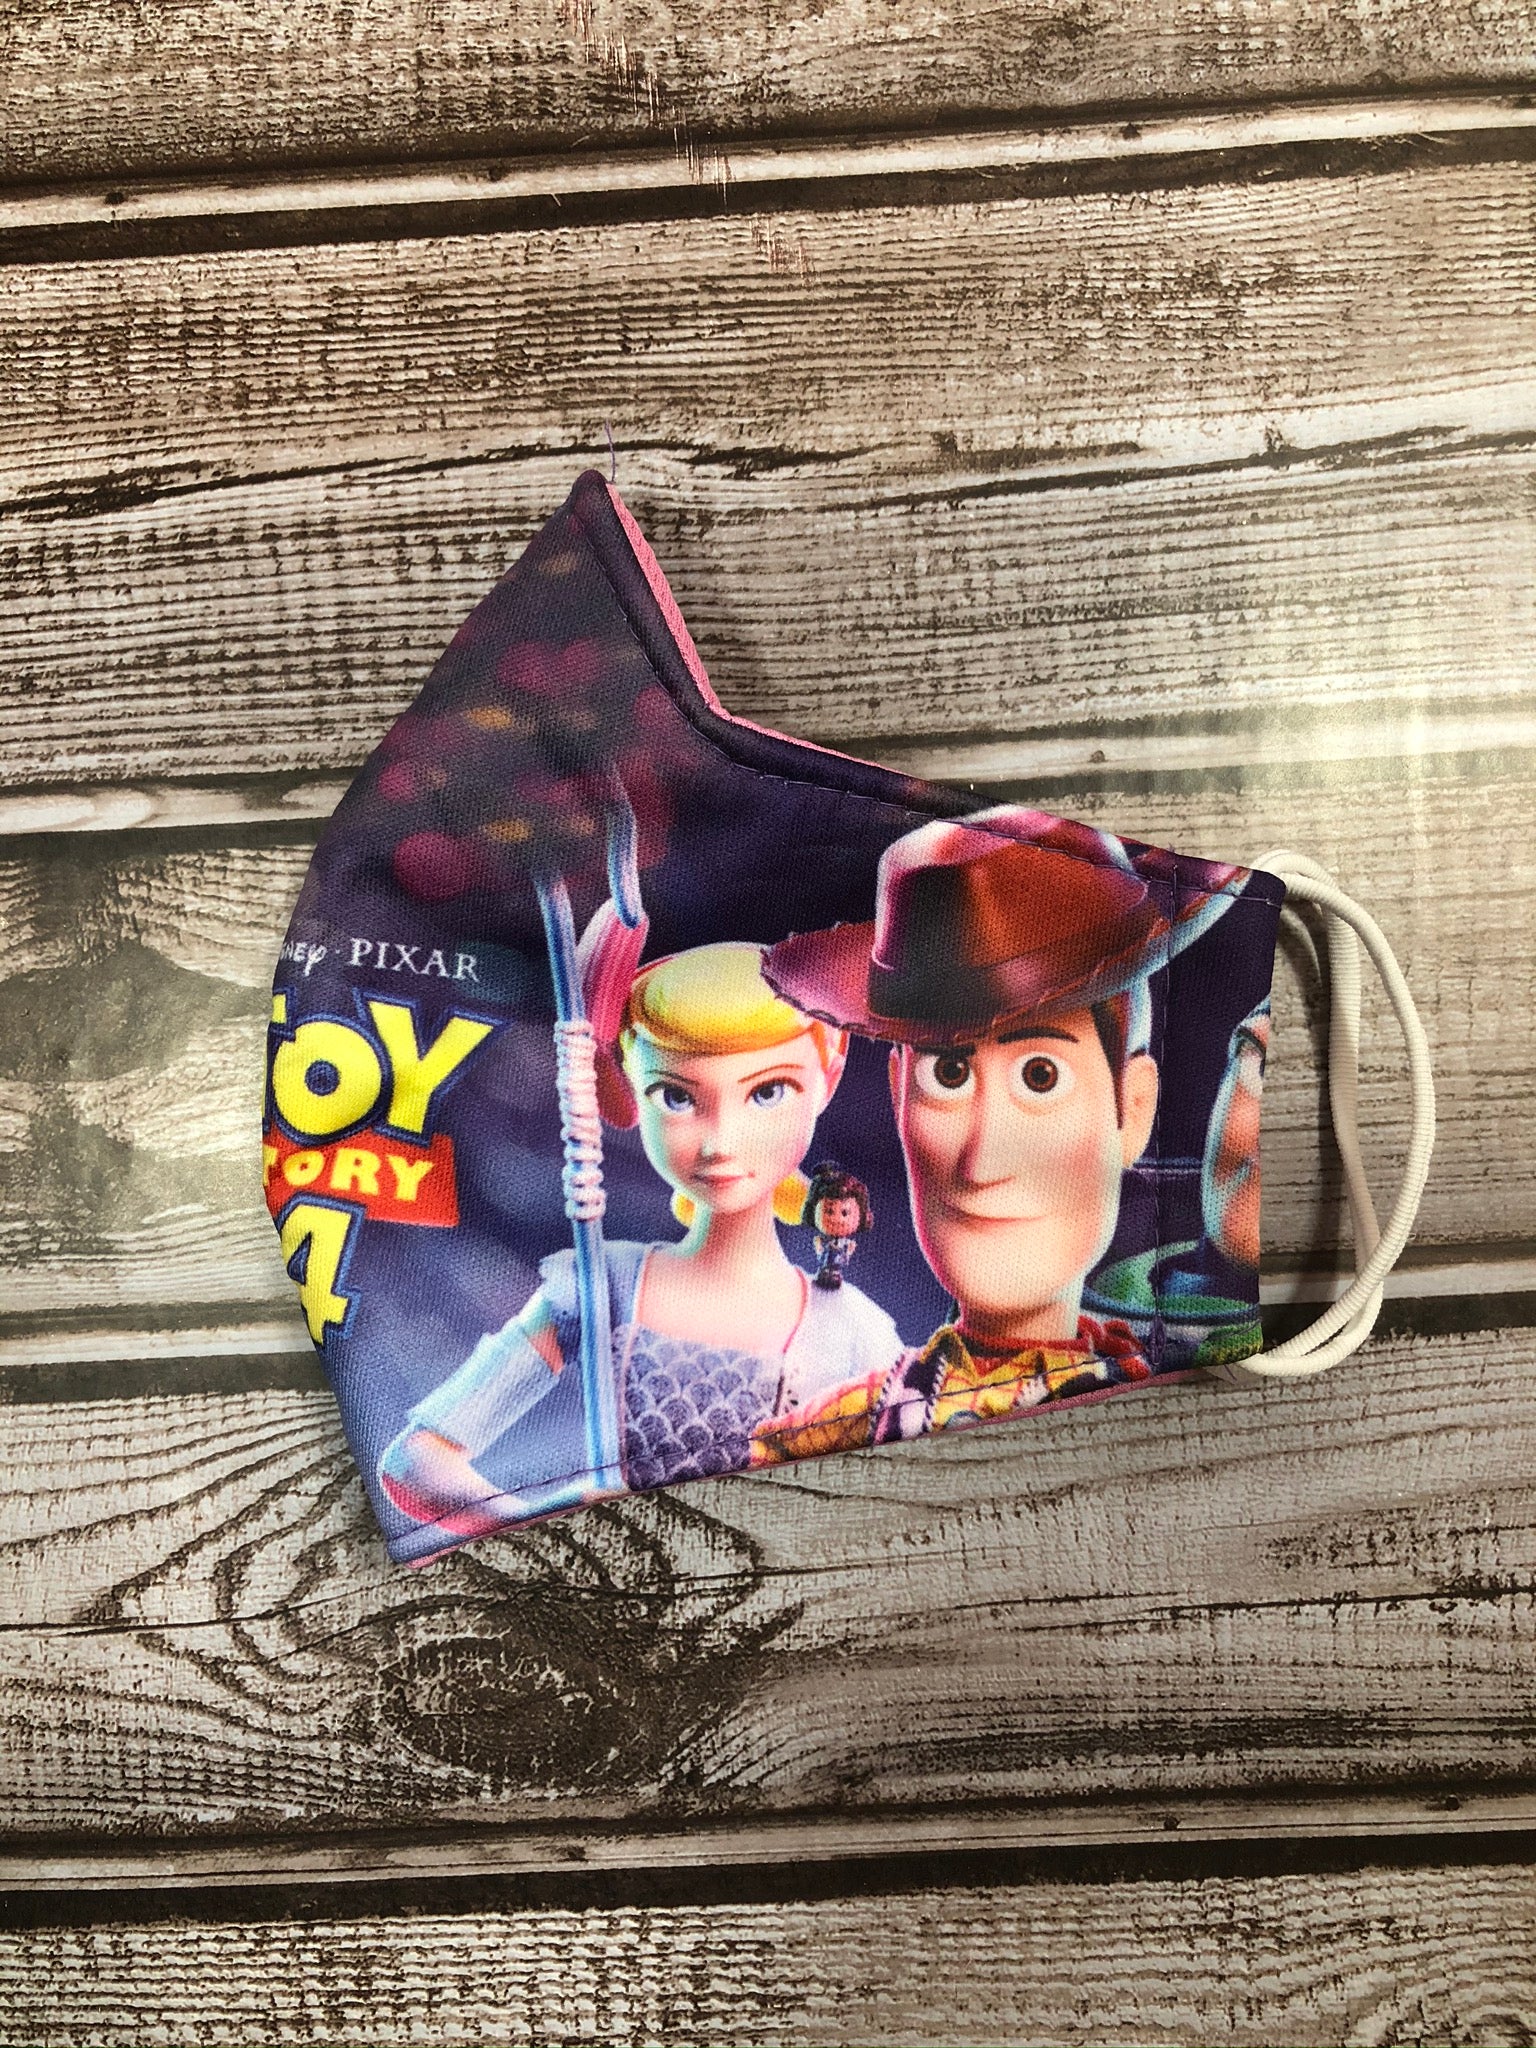 Toy story 4 face mask for teen & small adult